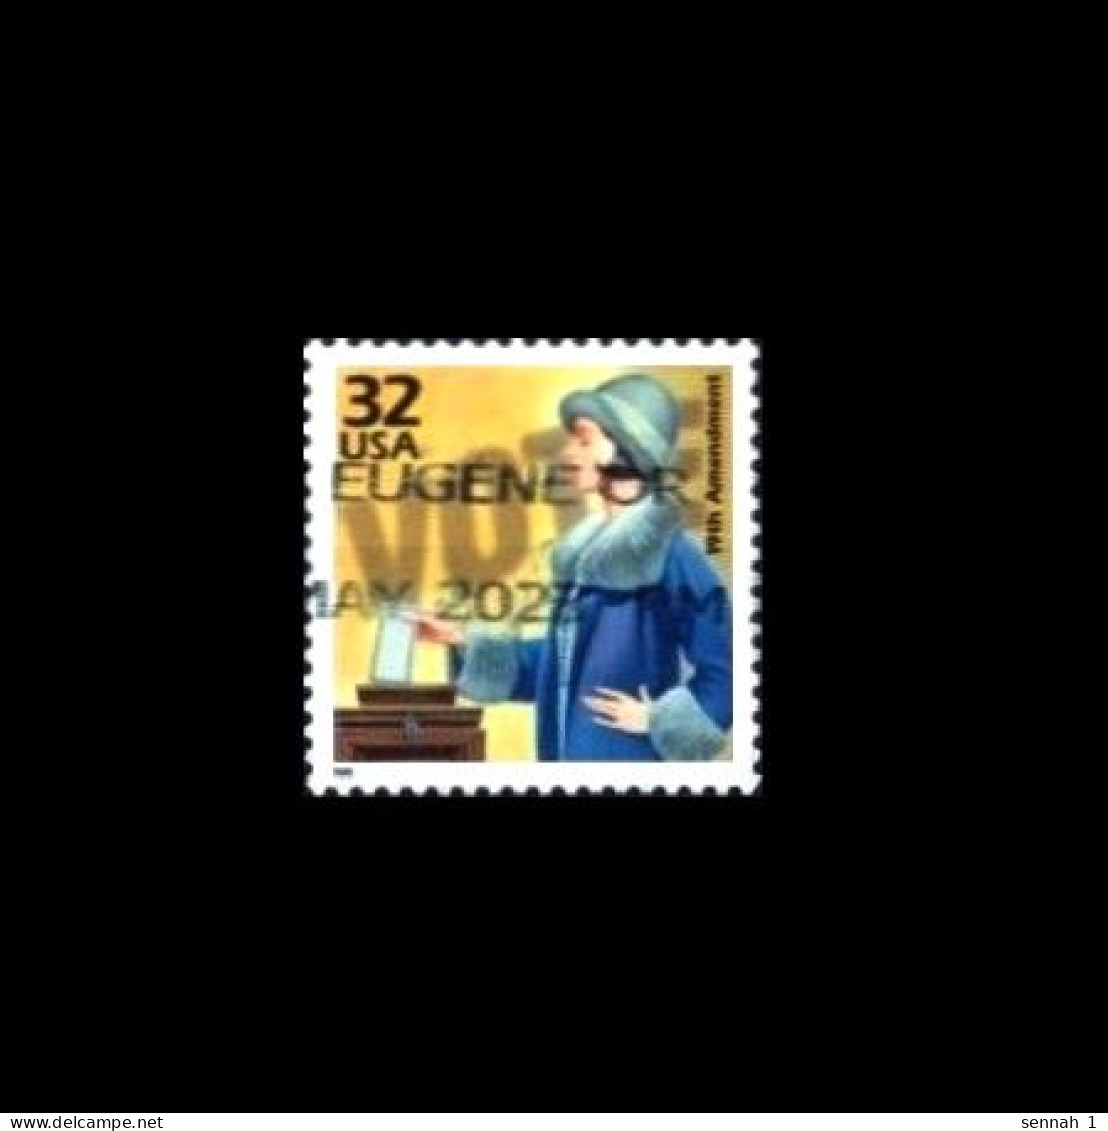 USA: 'Frauenwahlrecht, 1998' / '19th Amendment – Women's Suffrage', Mi. 2955; Yv. 2727; Sc. 3184e; SG 3425 Oo - Used Stamps